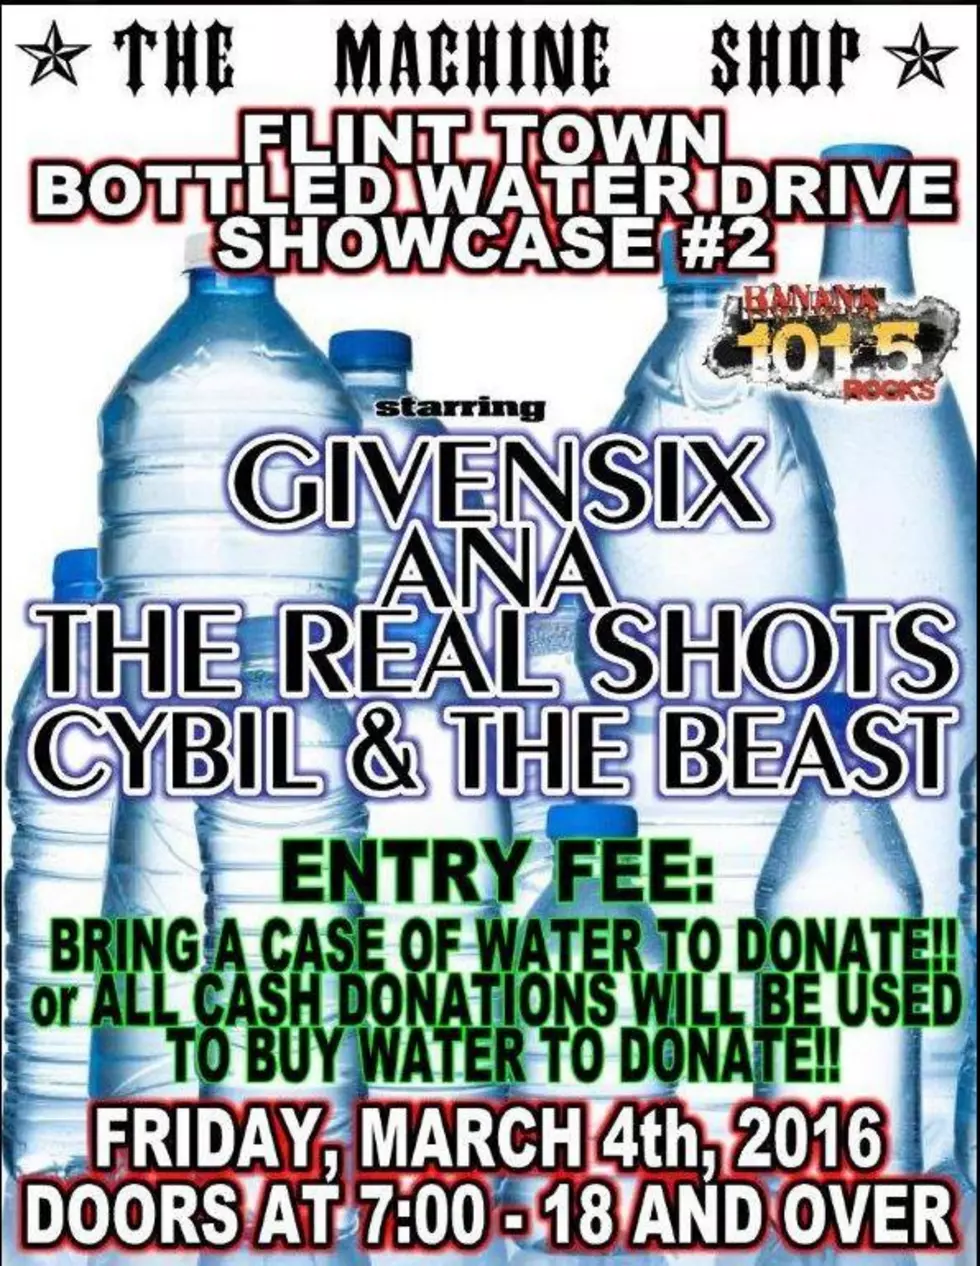 Flint Town Bottled Water Drive Tonight At The Machine Shop [VIDEO]